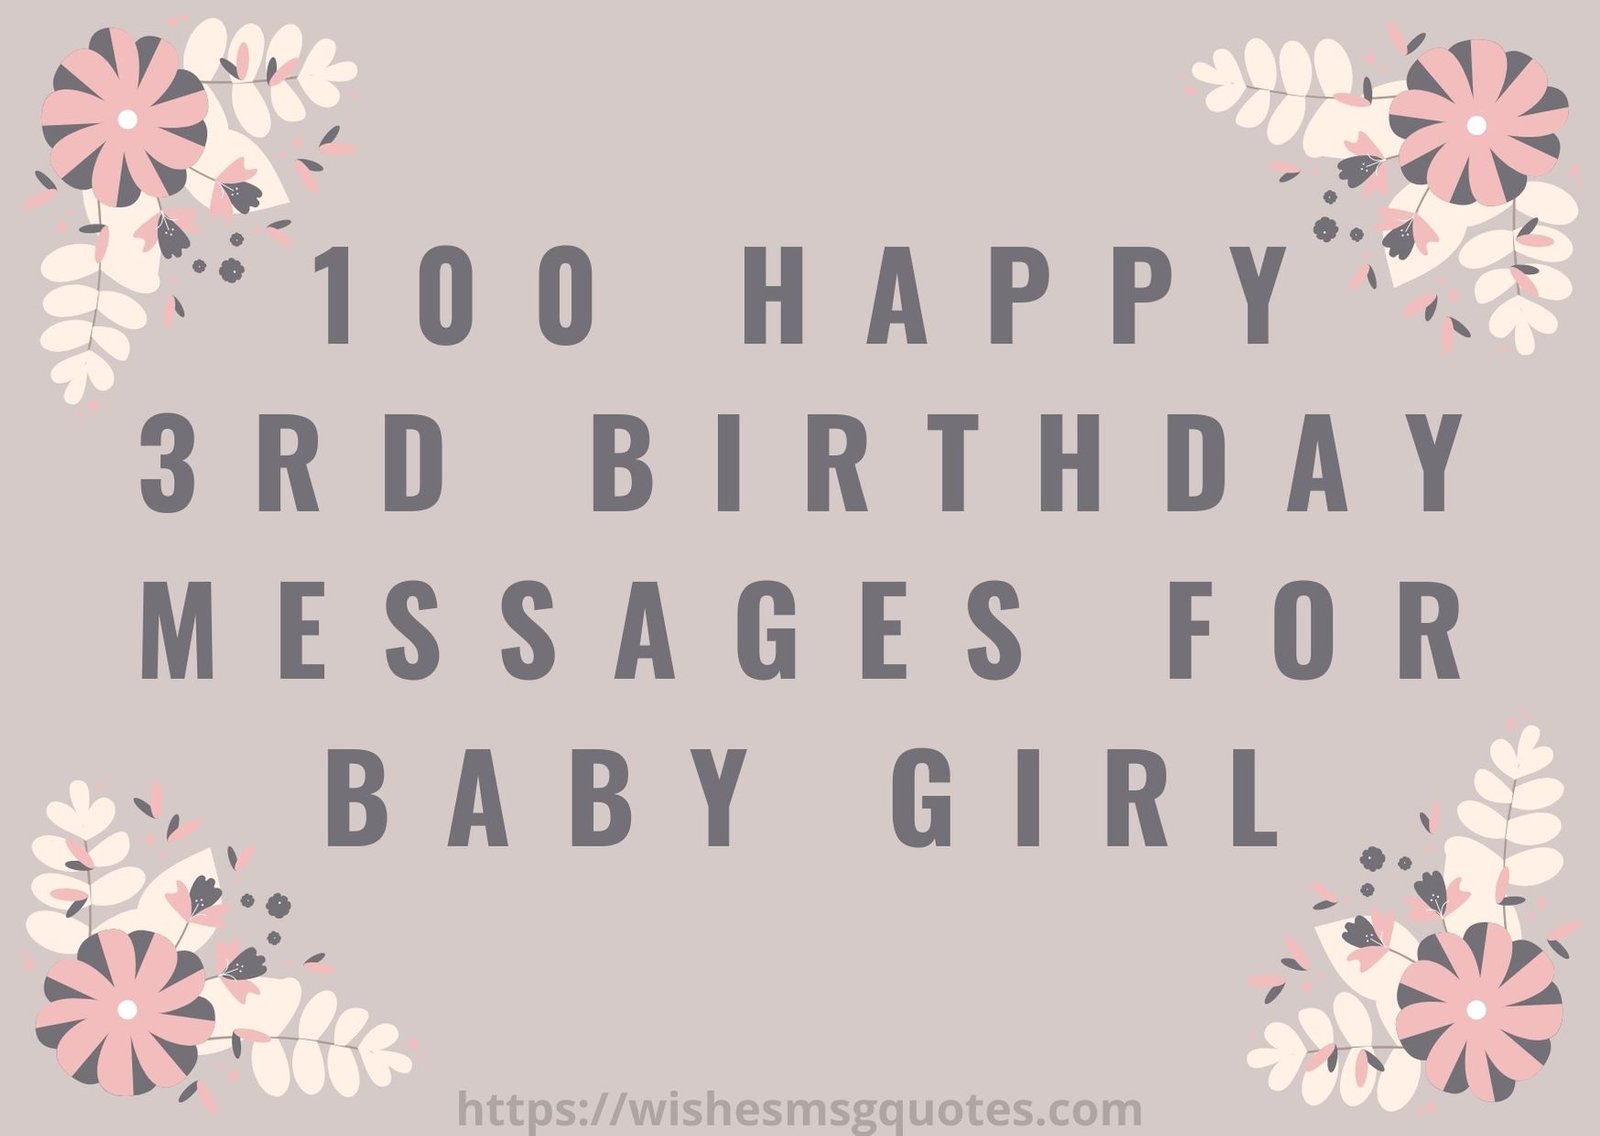 100 Happy 3rd Birthday Messages For Baby Girl